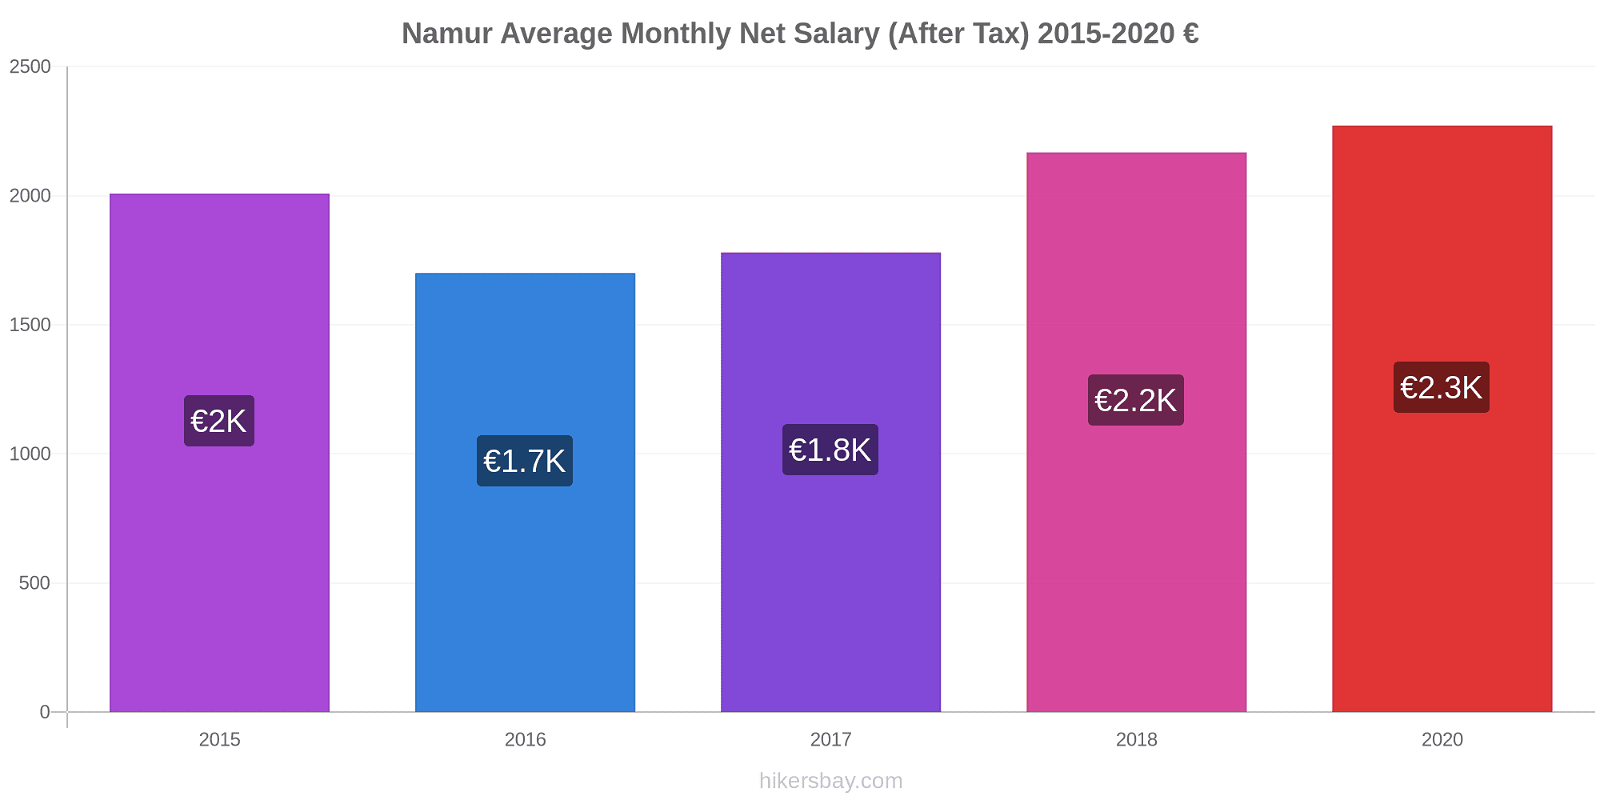 Namur price changes Average Monthly Net Salary (After Tax) hikersbay.com